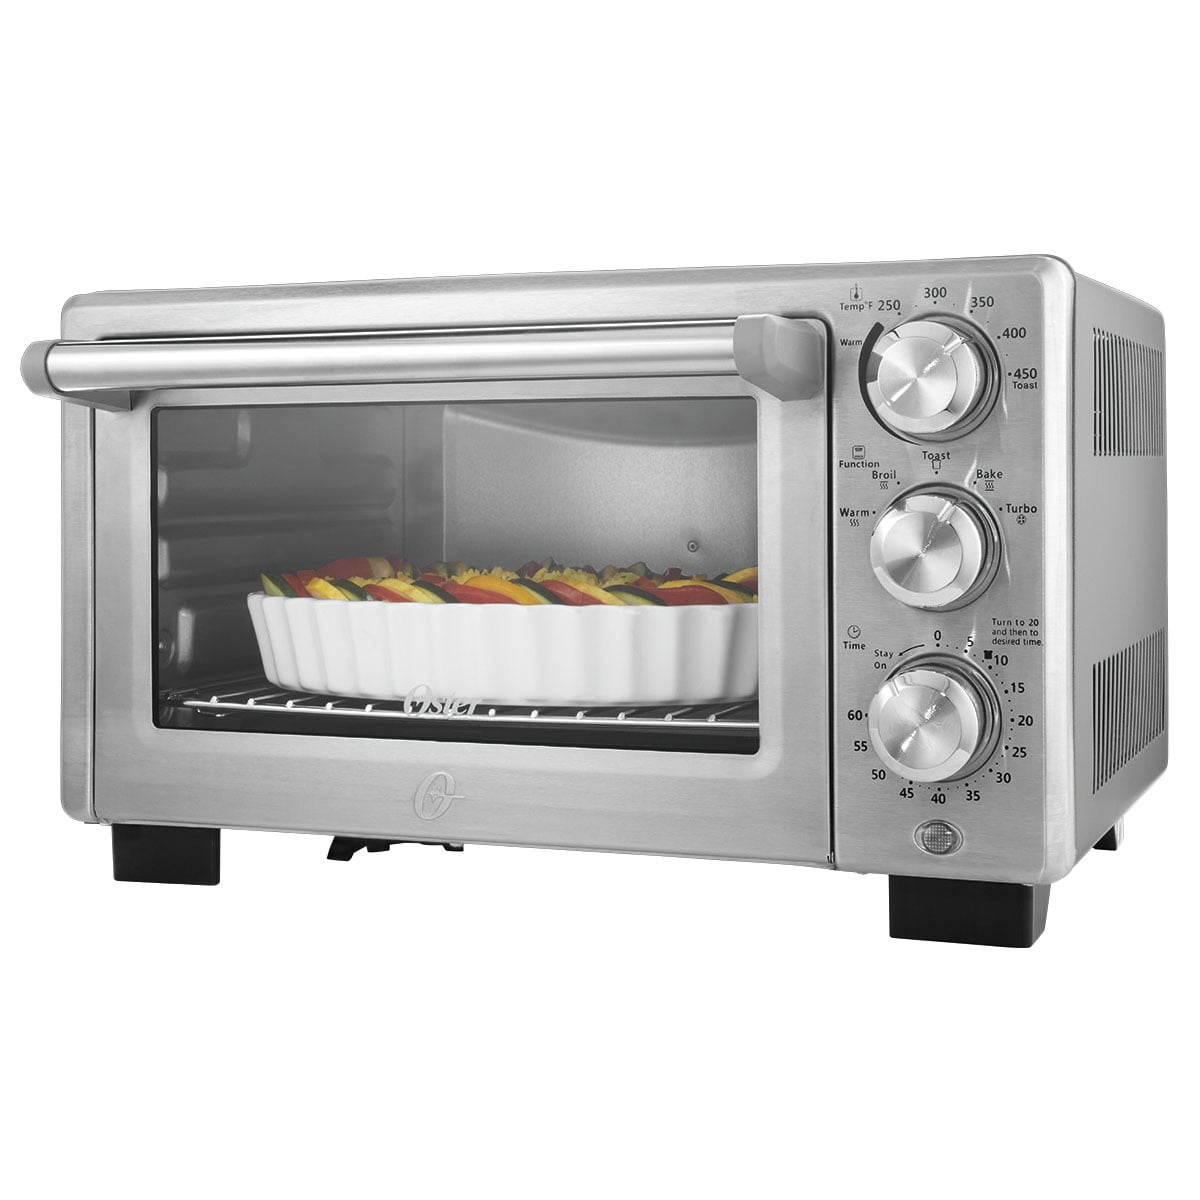 Oster Large Digital Countertop Oven, Brushed Stainless Steel 